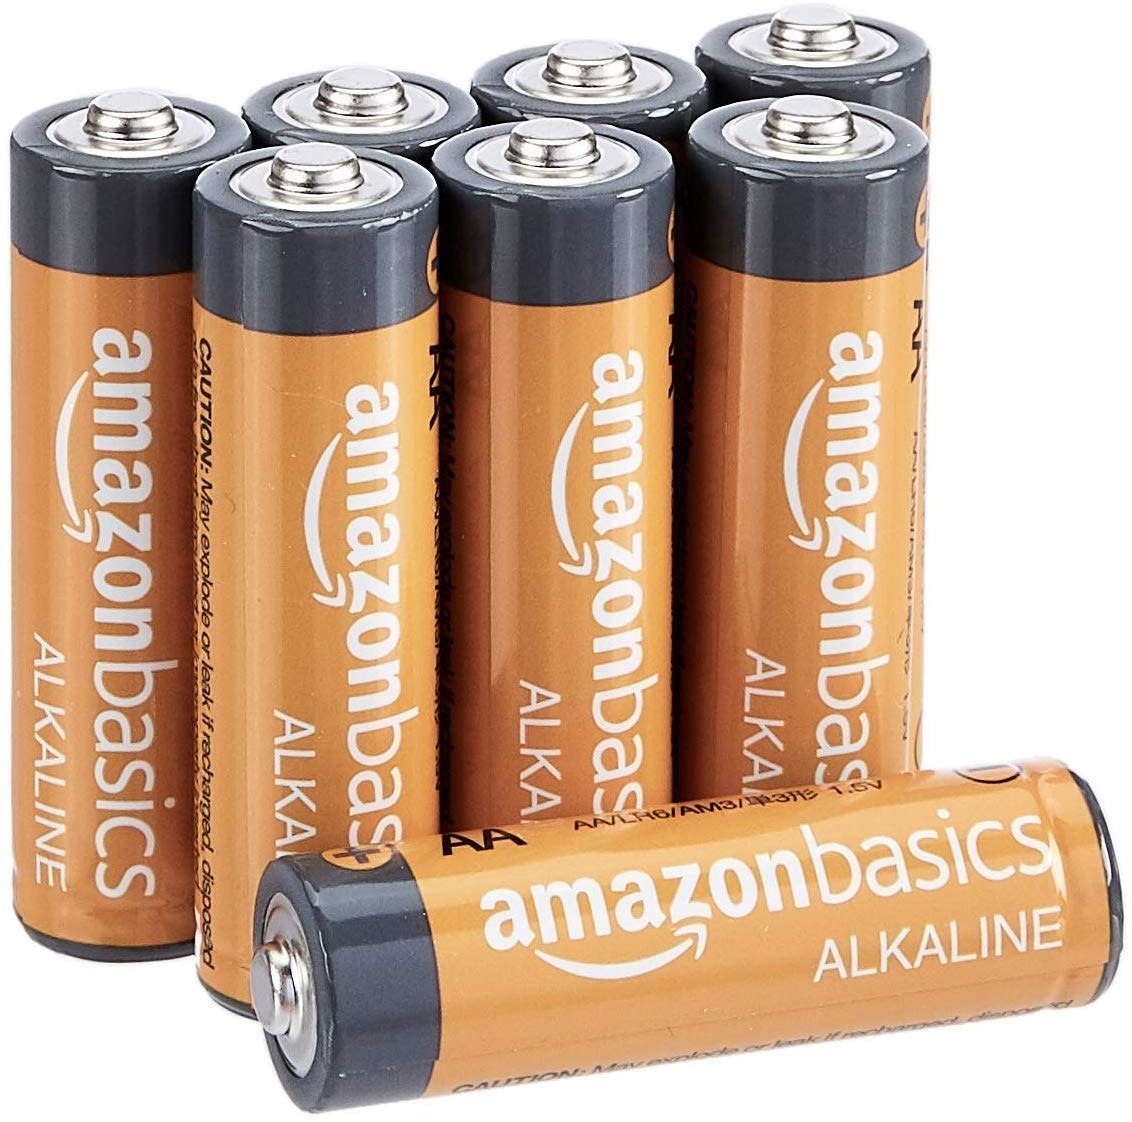 A set of multiple AA batteries in brown and black